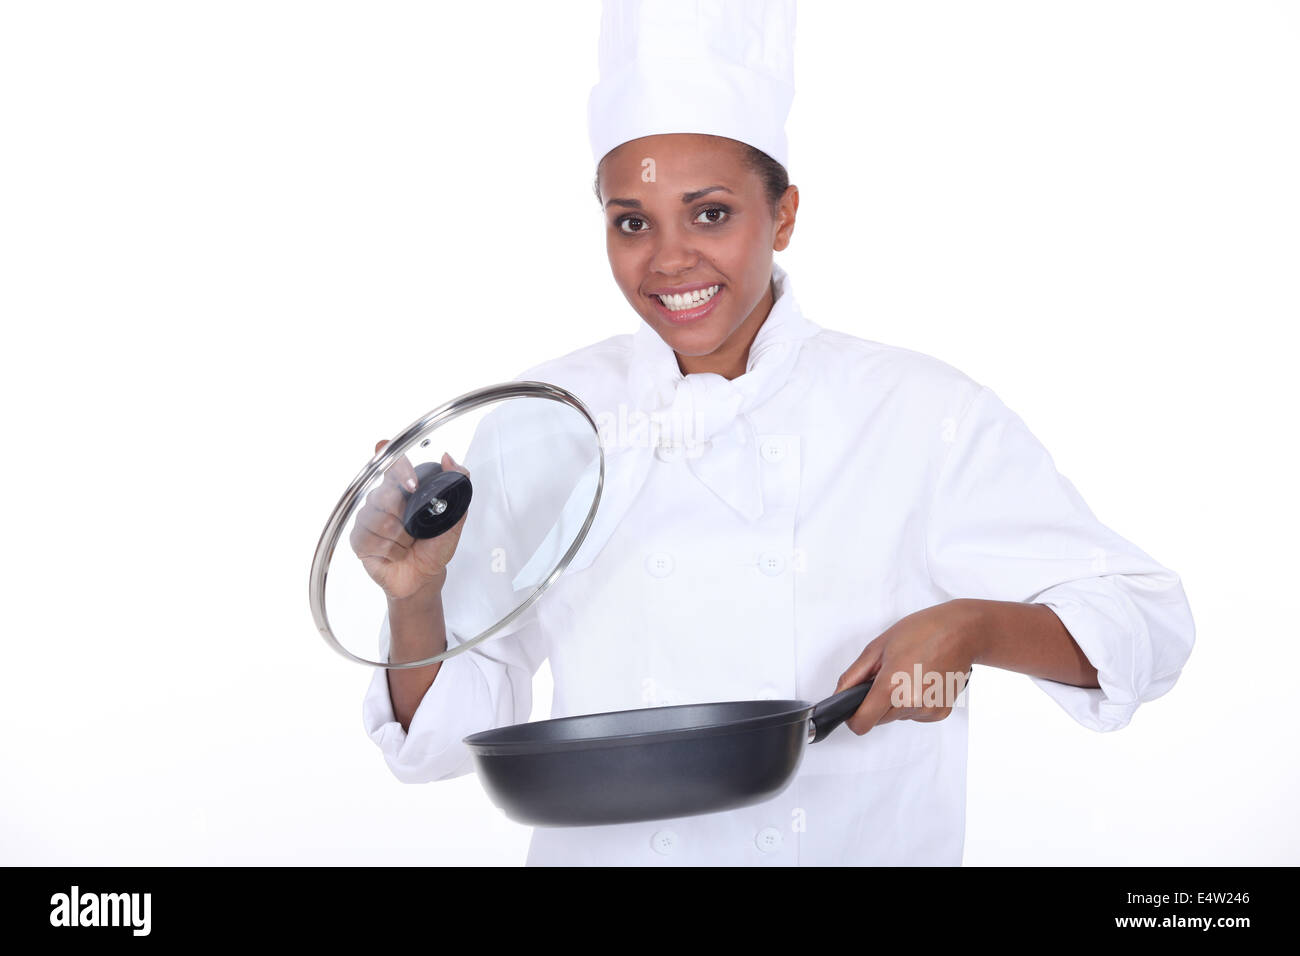 female chef exhibits a frying pan Stock Photo